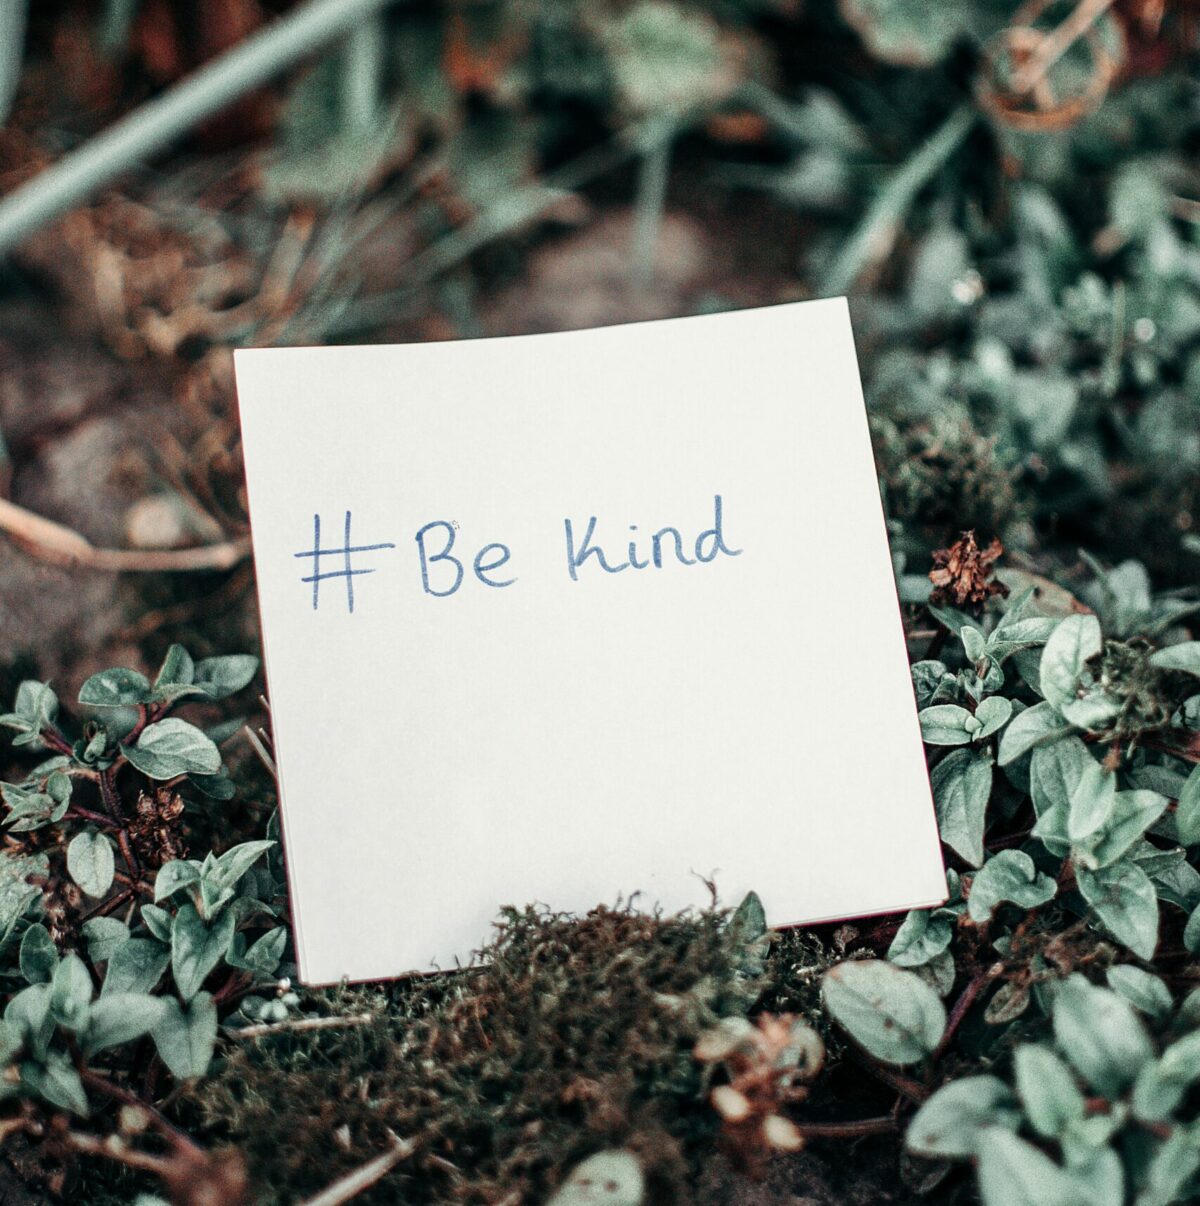 Kindness in the Workplace